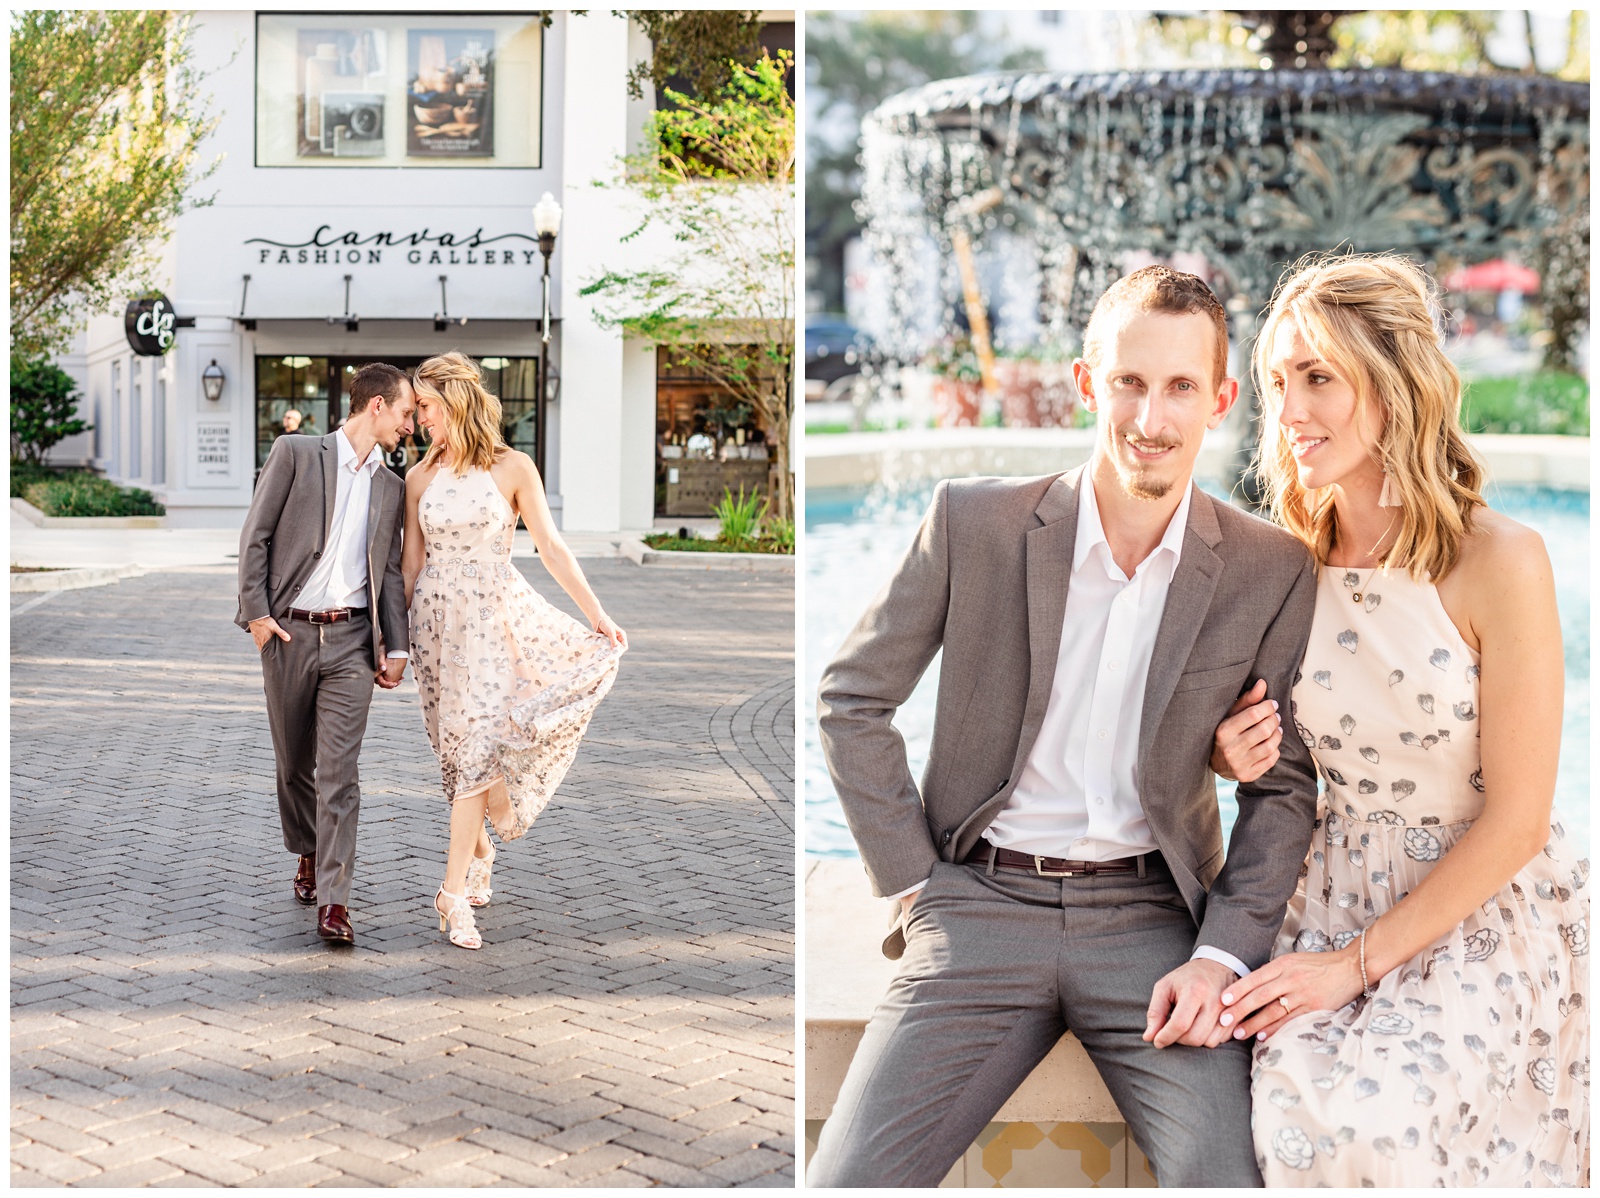 Hyde Park Engagement Session - Matlock and Kelly Photography